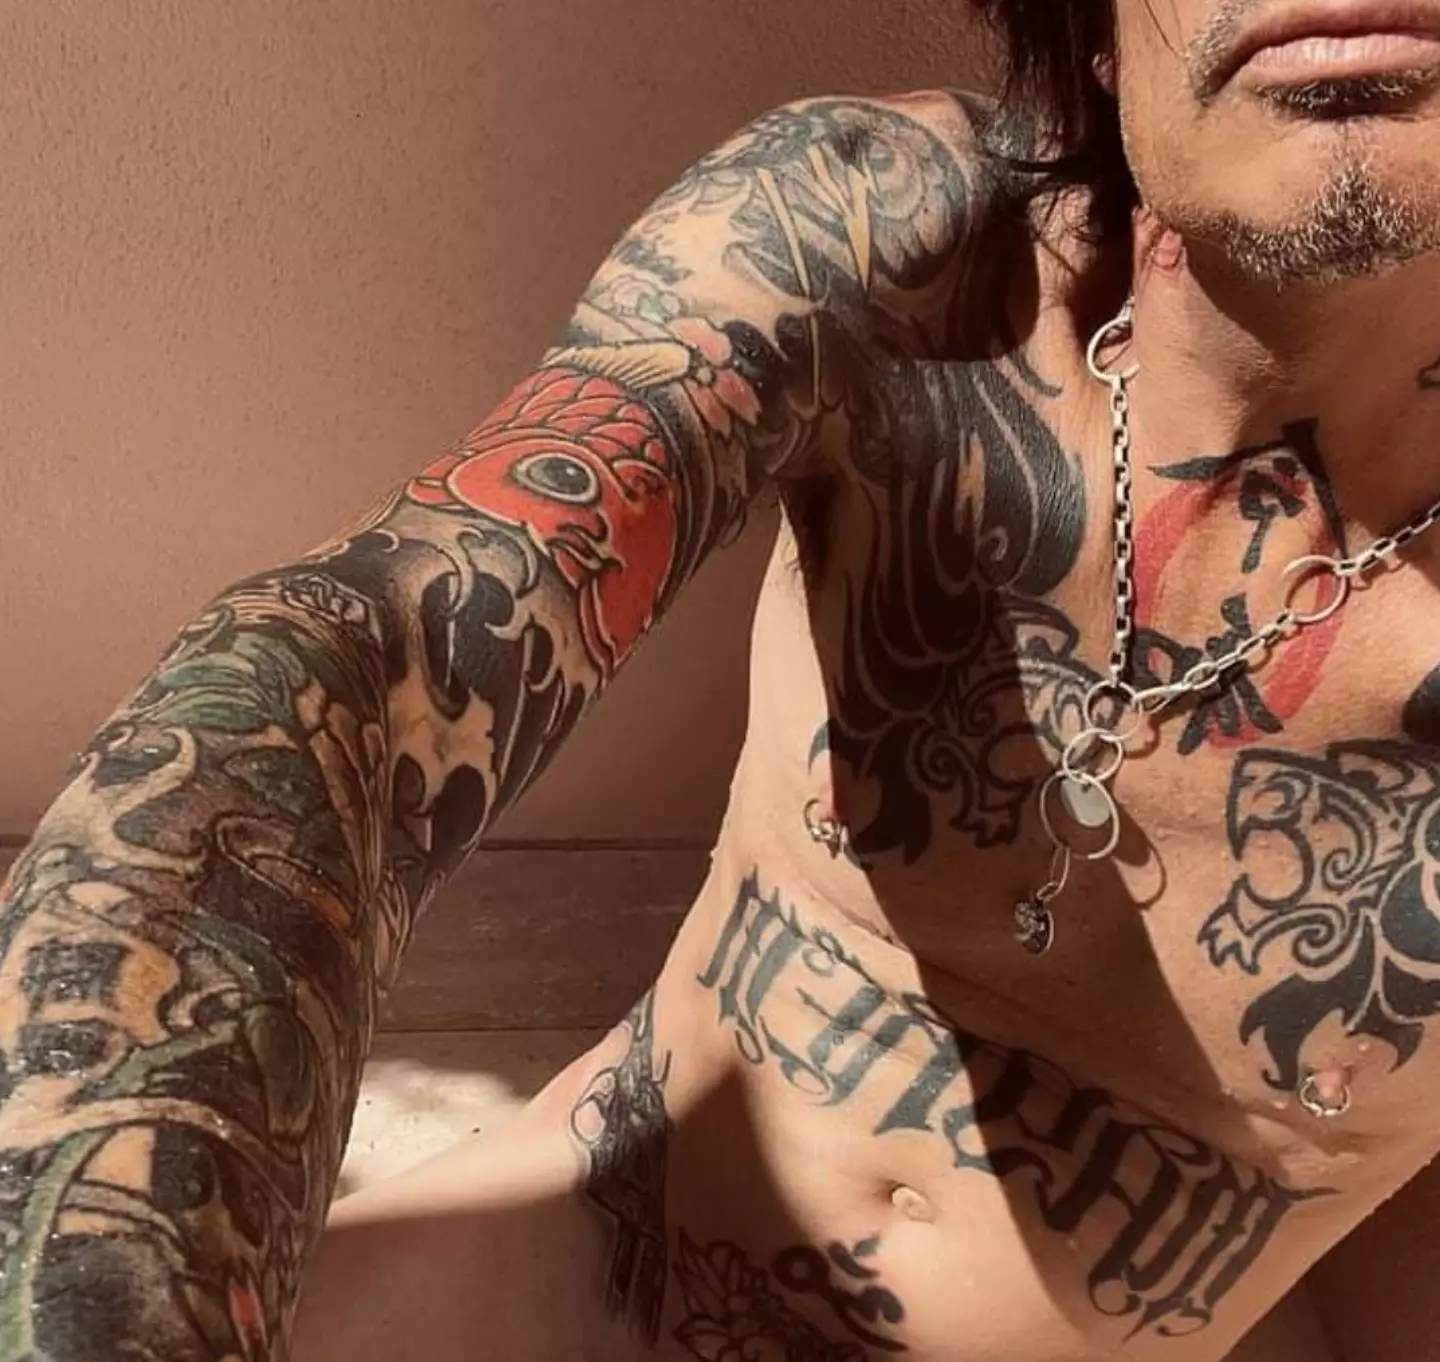 Tommy Lee horrified his social media followers on Thursday when he posted a full frontal naked photo.